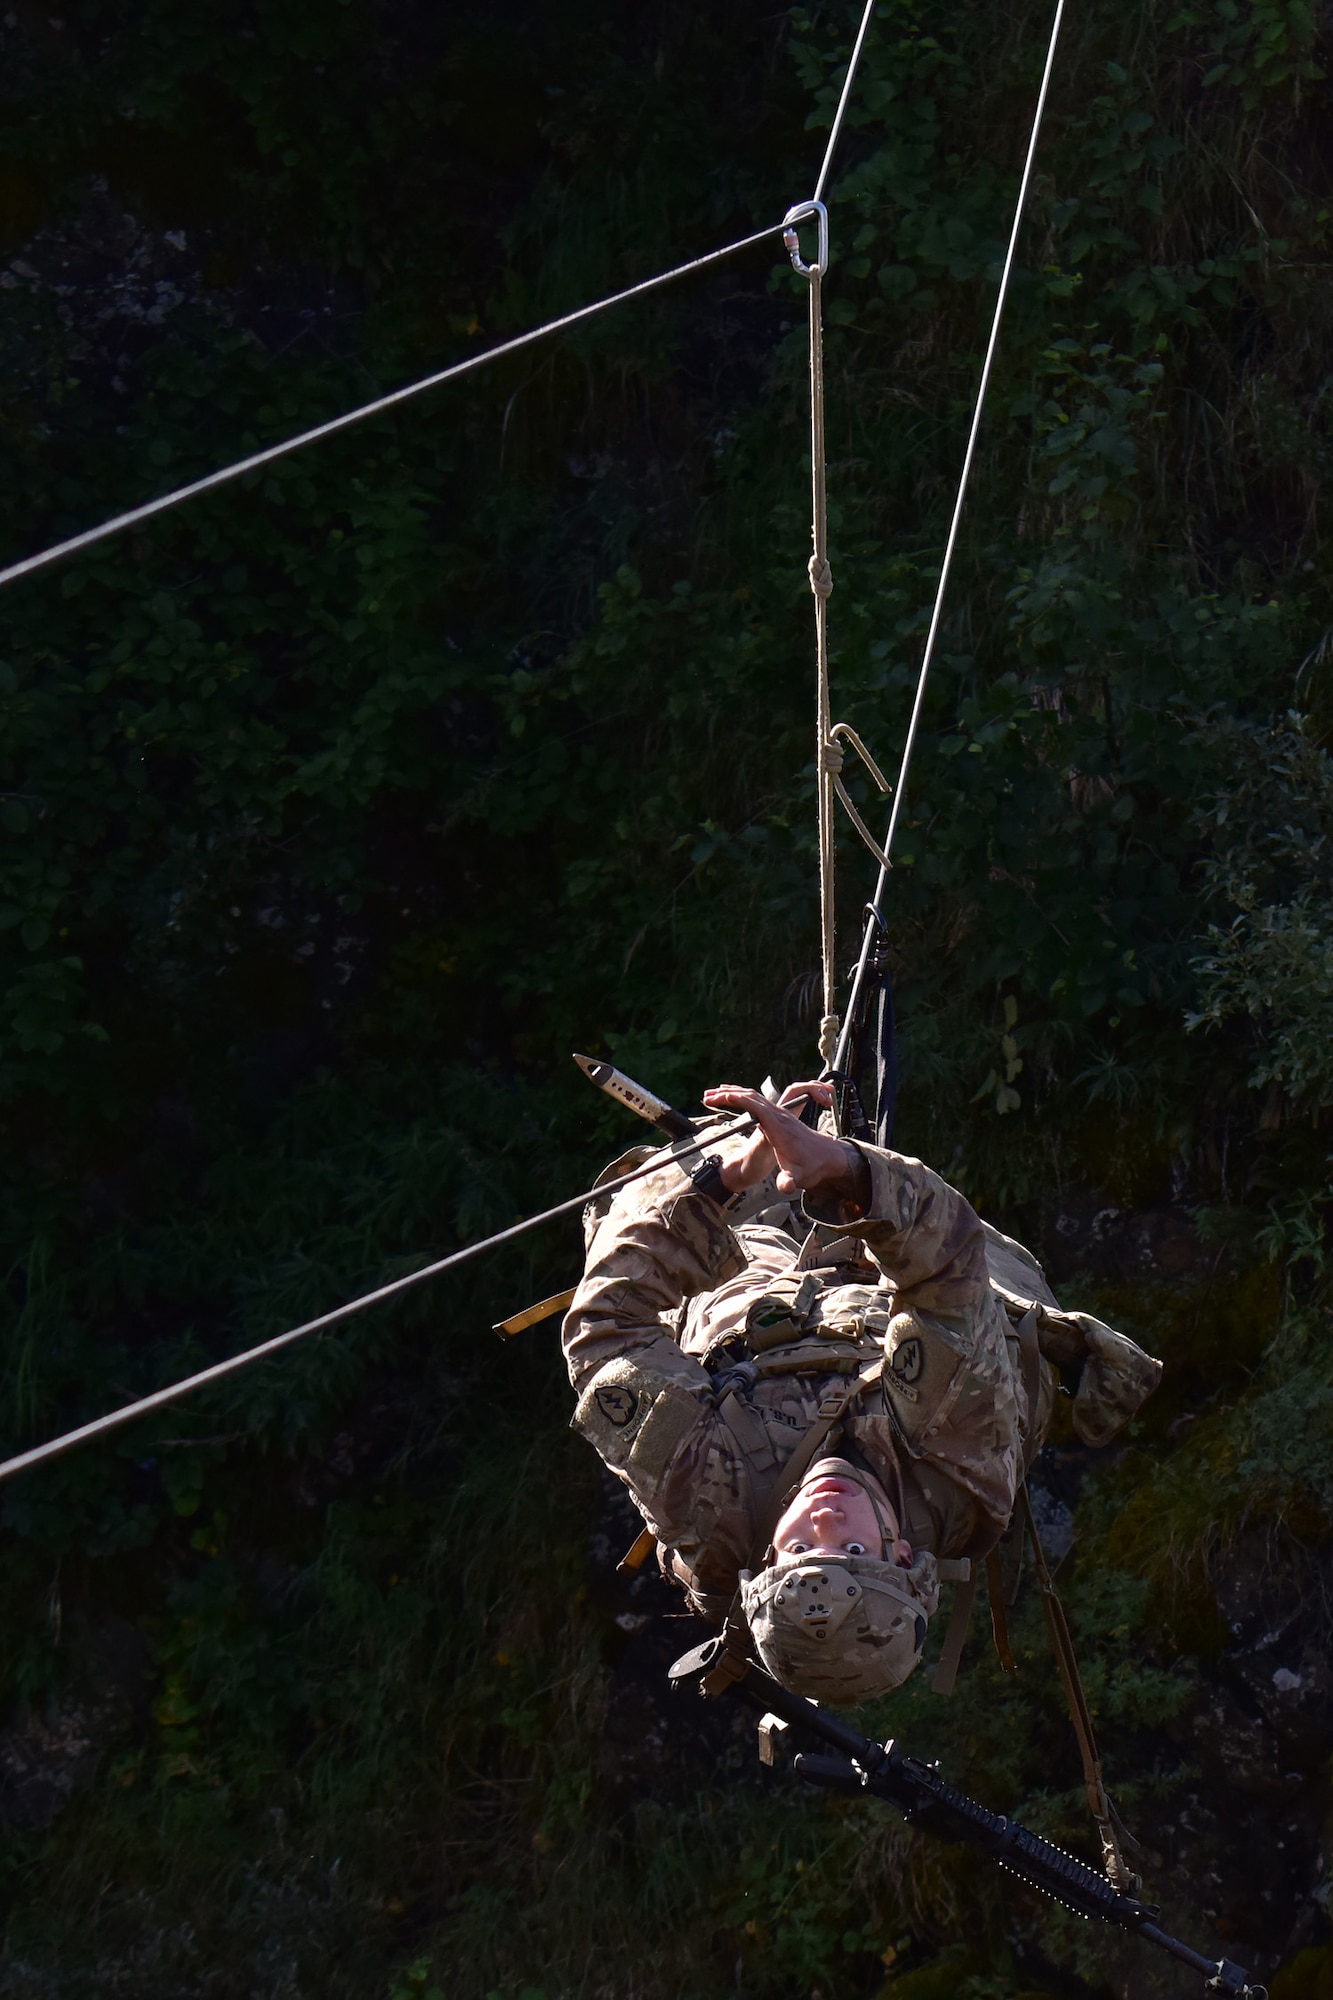 Basic Military Mountaineering Course student Spc. Kevin Vang crosses a rope bridge over a mountain gorge at the Northern Warfare Training Center’s Black Rapids Site during training. NWTC cadre followed Coronavirus restrictions while guiding students through both the basic and advanced mountaineering courses in August. With the advent of Alaska’s long, cold winter, NWTC’s focus is now shifting to cold weather training for the 2020-21 season.